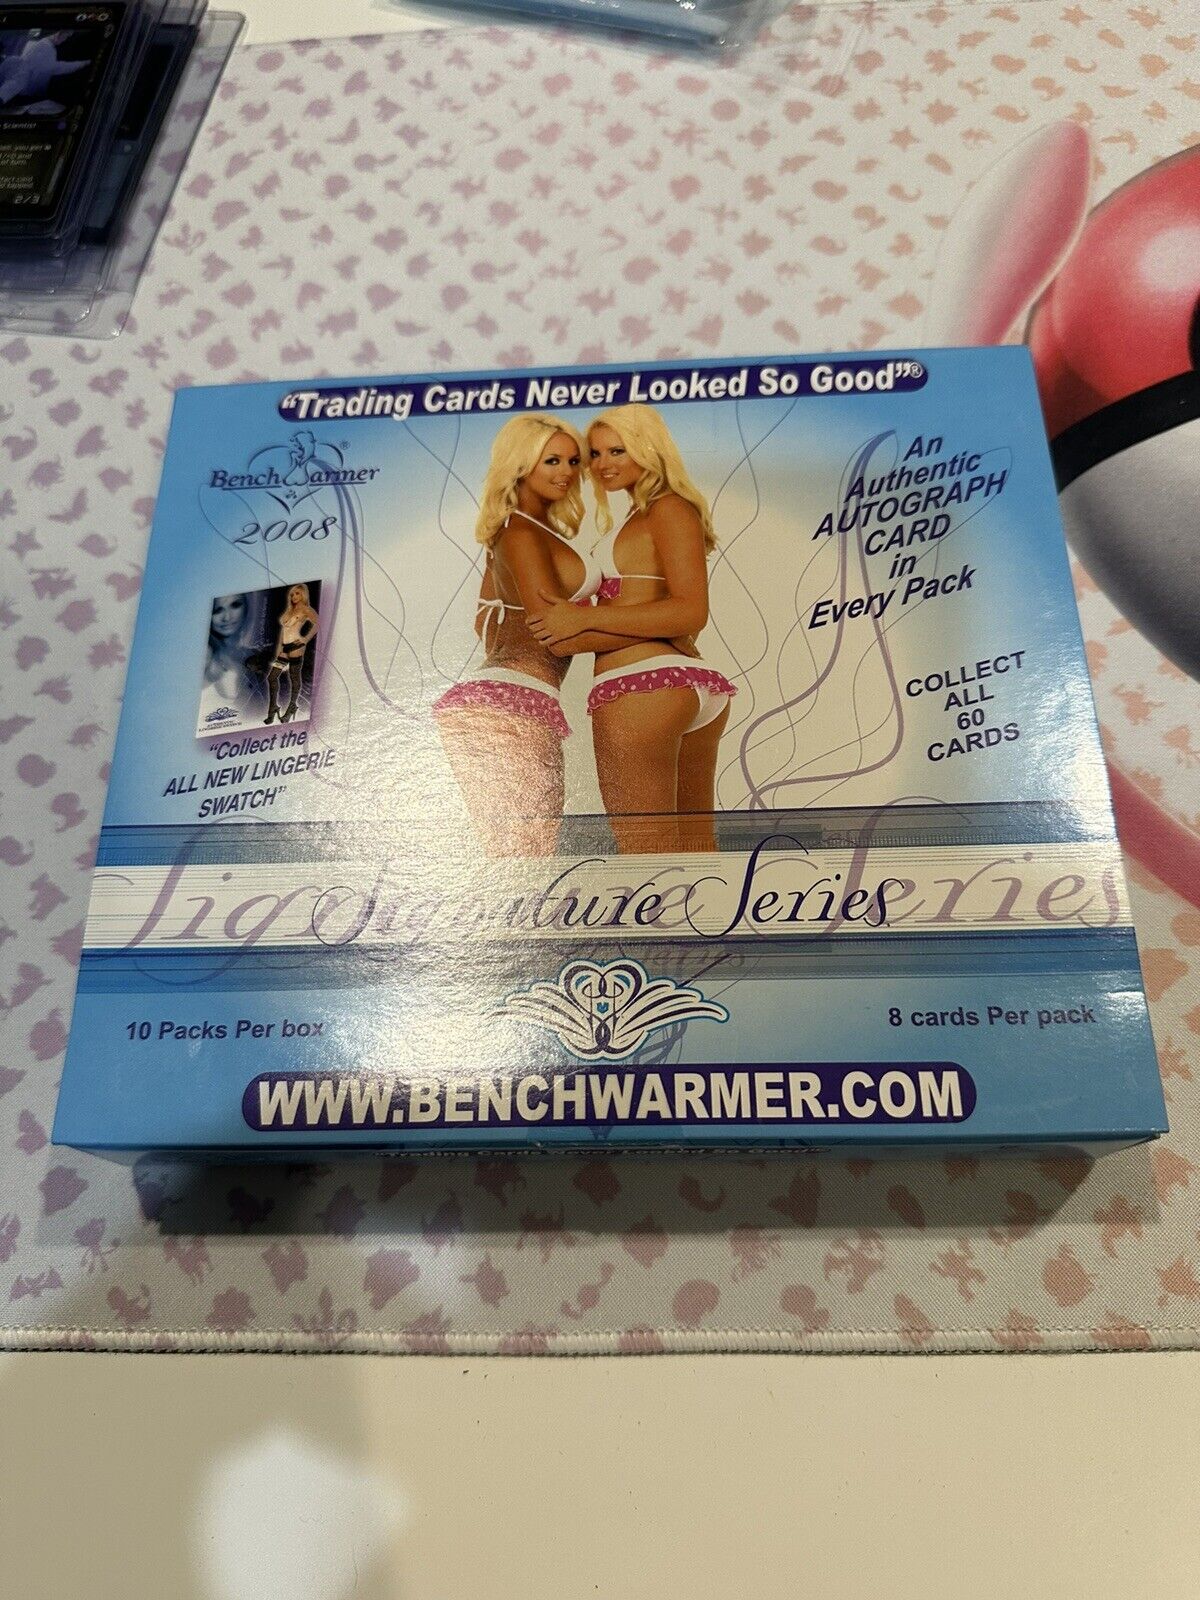 2008 benchwarmer Booster Pack Factory Sealed Autograph In Every Pack